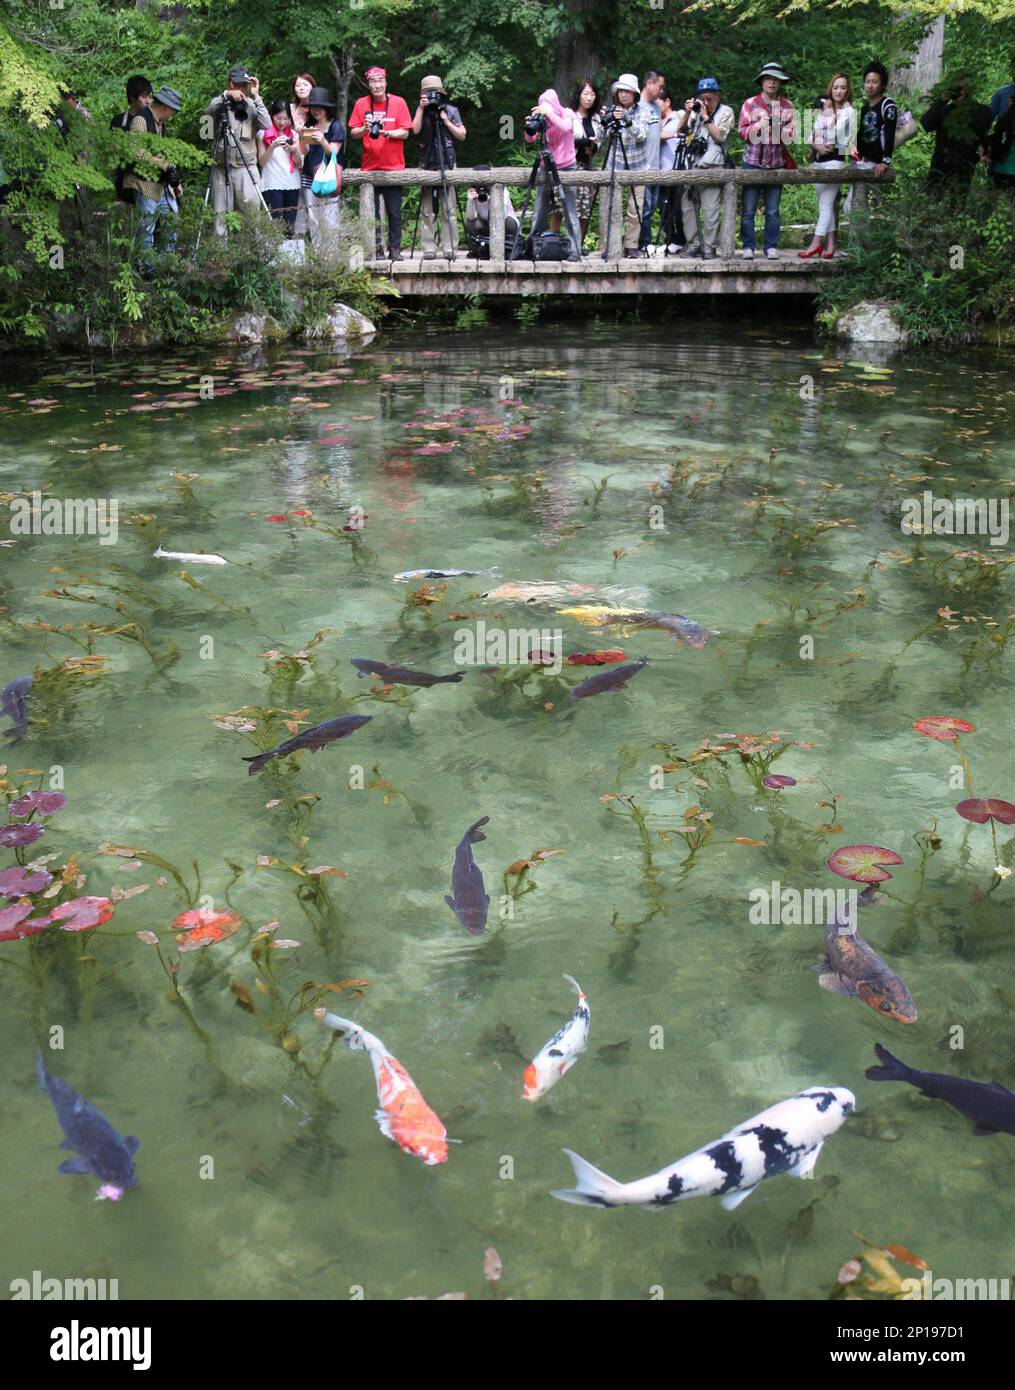 https://c8.alamy.com/comp/2P197D1/tourits-and-visitors-take-photographs-of-water-lilies-and-carps-in-the-pond-which-resembles-to-a-series-of-paintings-by-claude-monet-the-great-impressionist-in-seki-gifu-prefecture-on-june-12-2016-people-dub-the-pond-as-monet-pond-and-admired-the-picturesque-pond-the-yomiuri-shimbun-via-ap-images-2P197D1.jpg